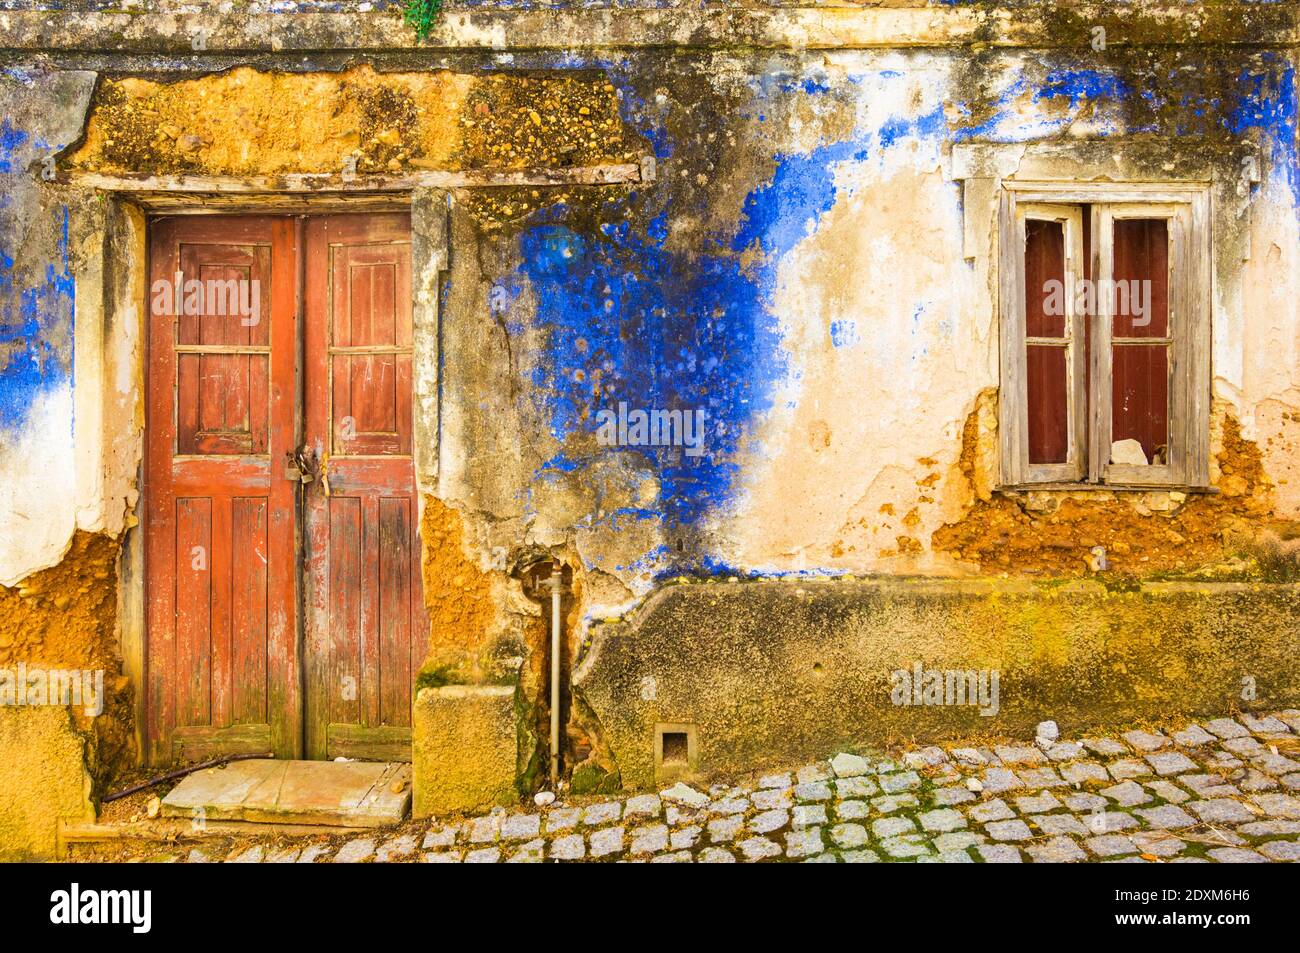 Old walls and door of a ruined blue painted cottage in the village of Aljezur Algarve district Portugal EU Europe Stock Photo